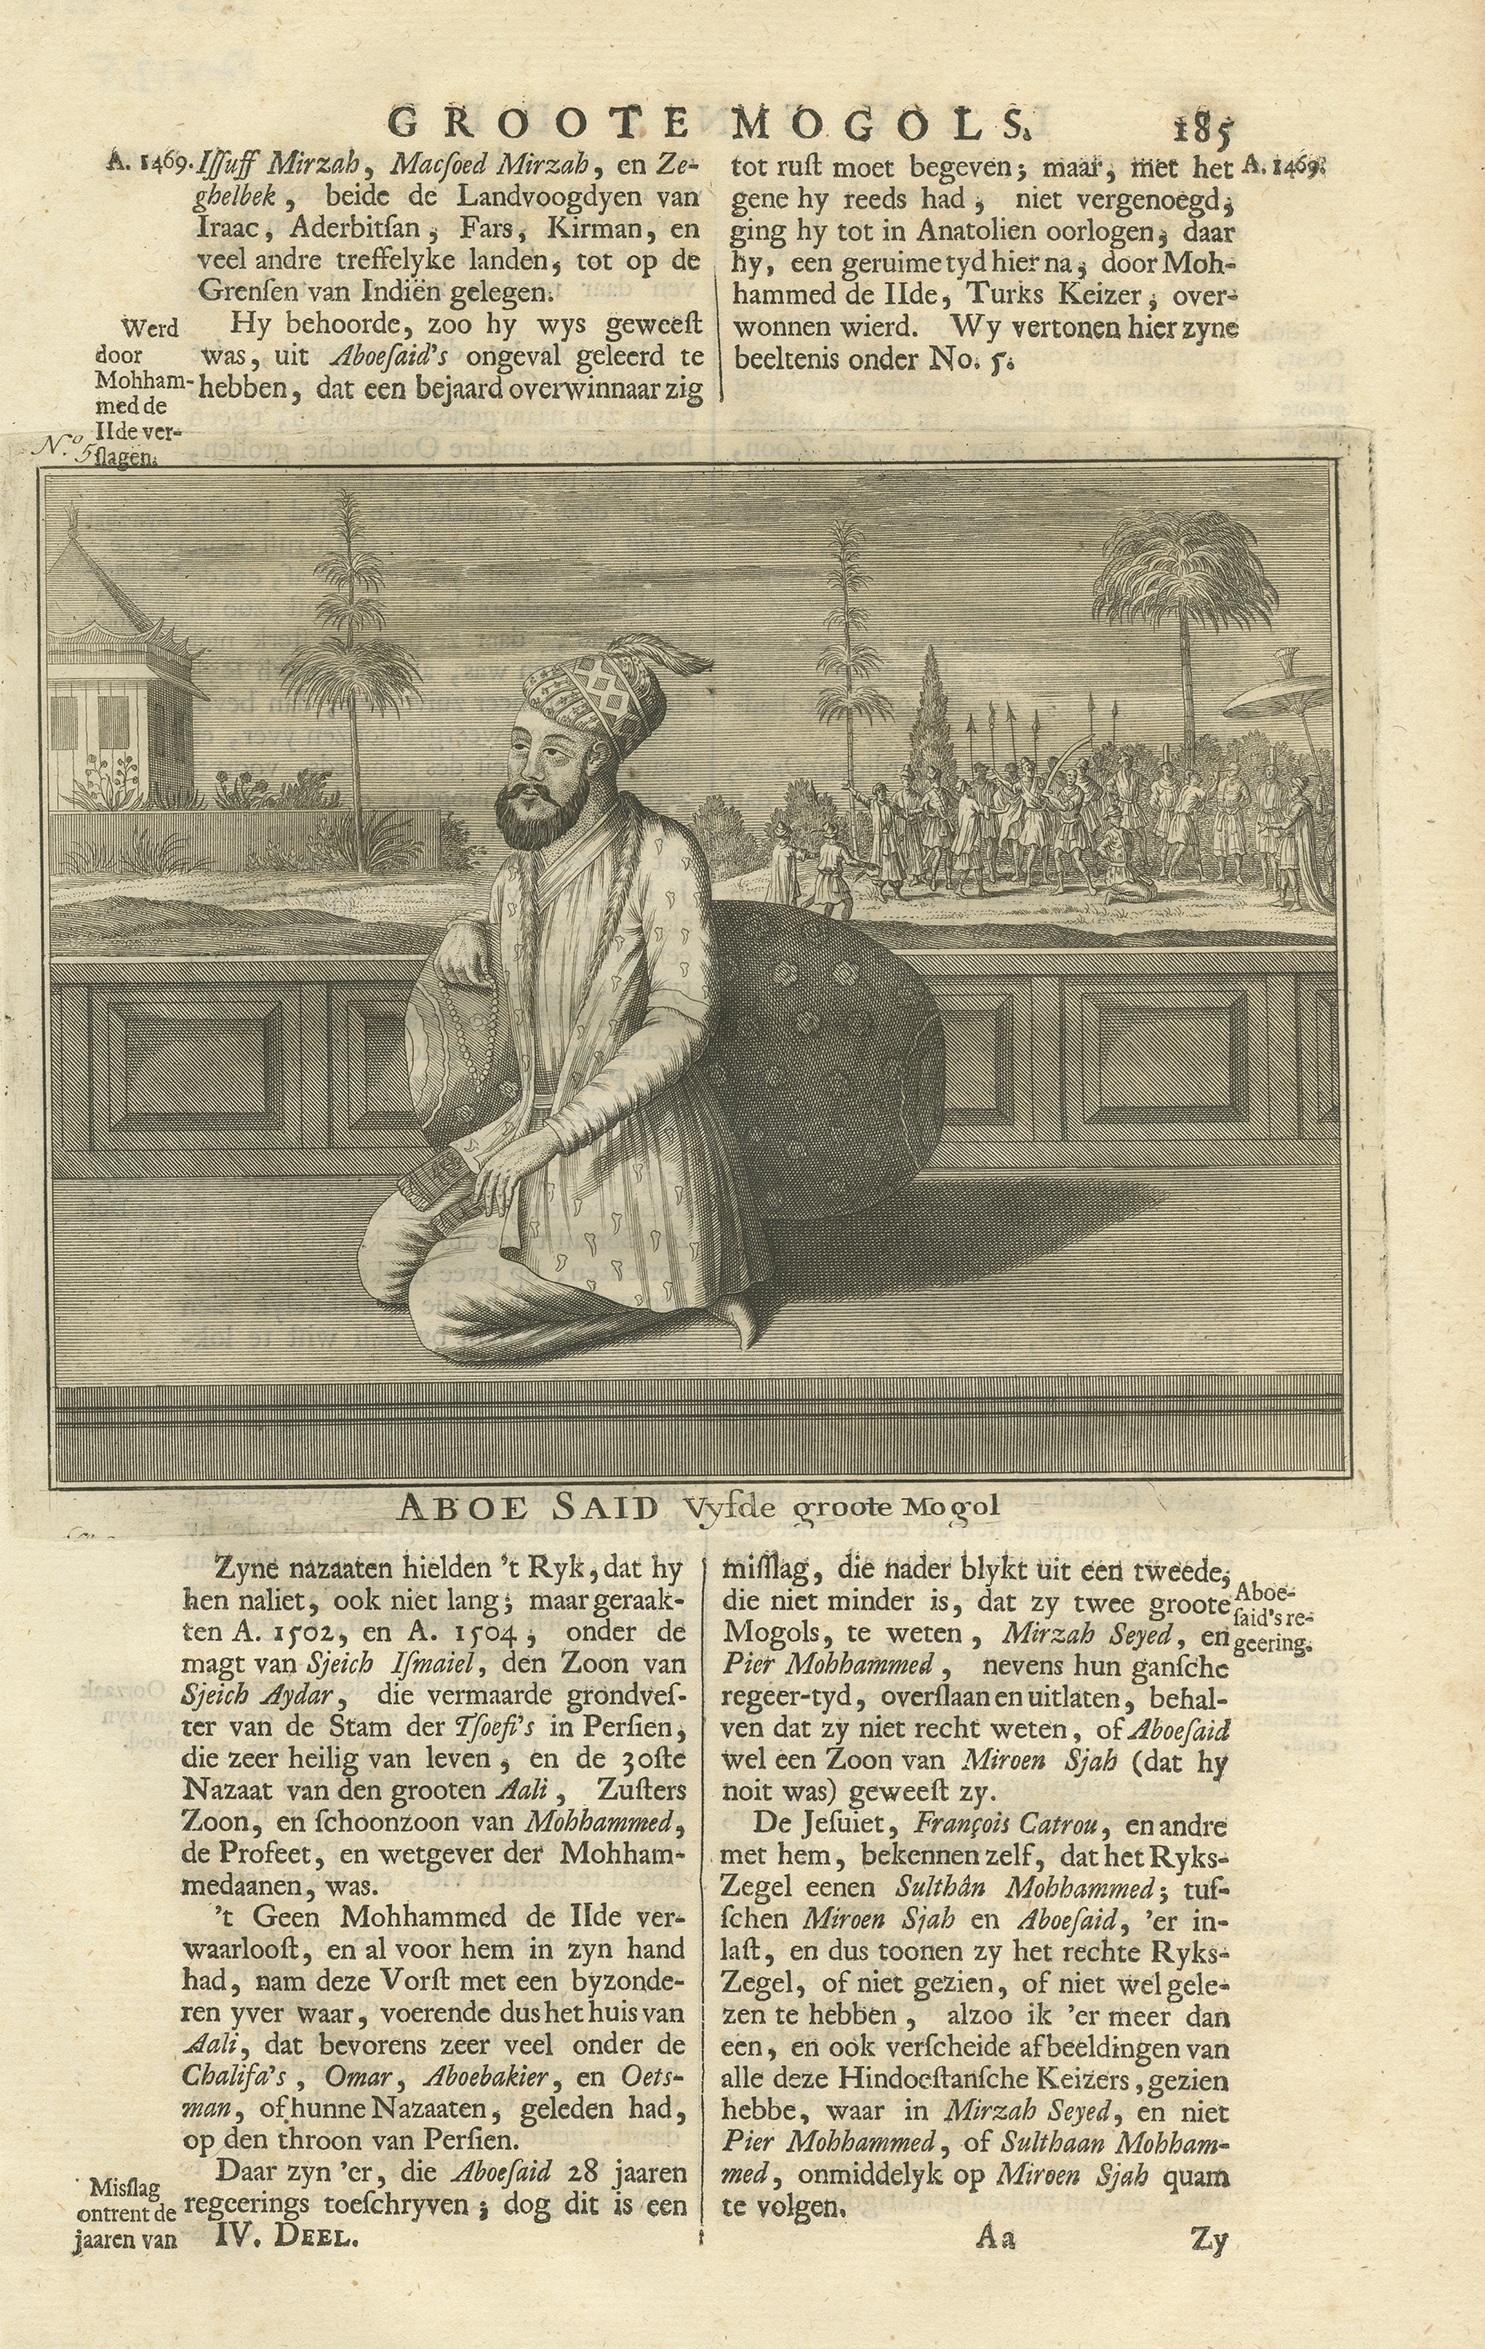 Antique print titled 'Aboe Said, vyfde Groote Mogol'. This print depicts Shah Jahan, the 5th Mughal Emperor. Text on verso. This print originates from 'Oud en Nieuw Oost-Indiën' by F. Valentijn.